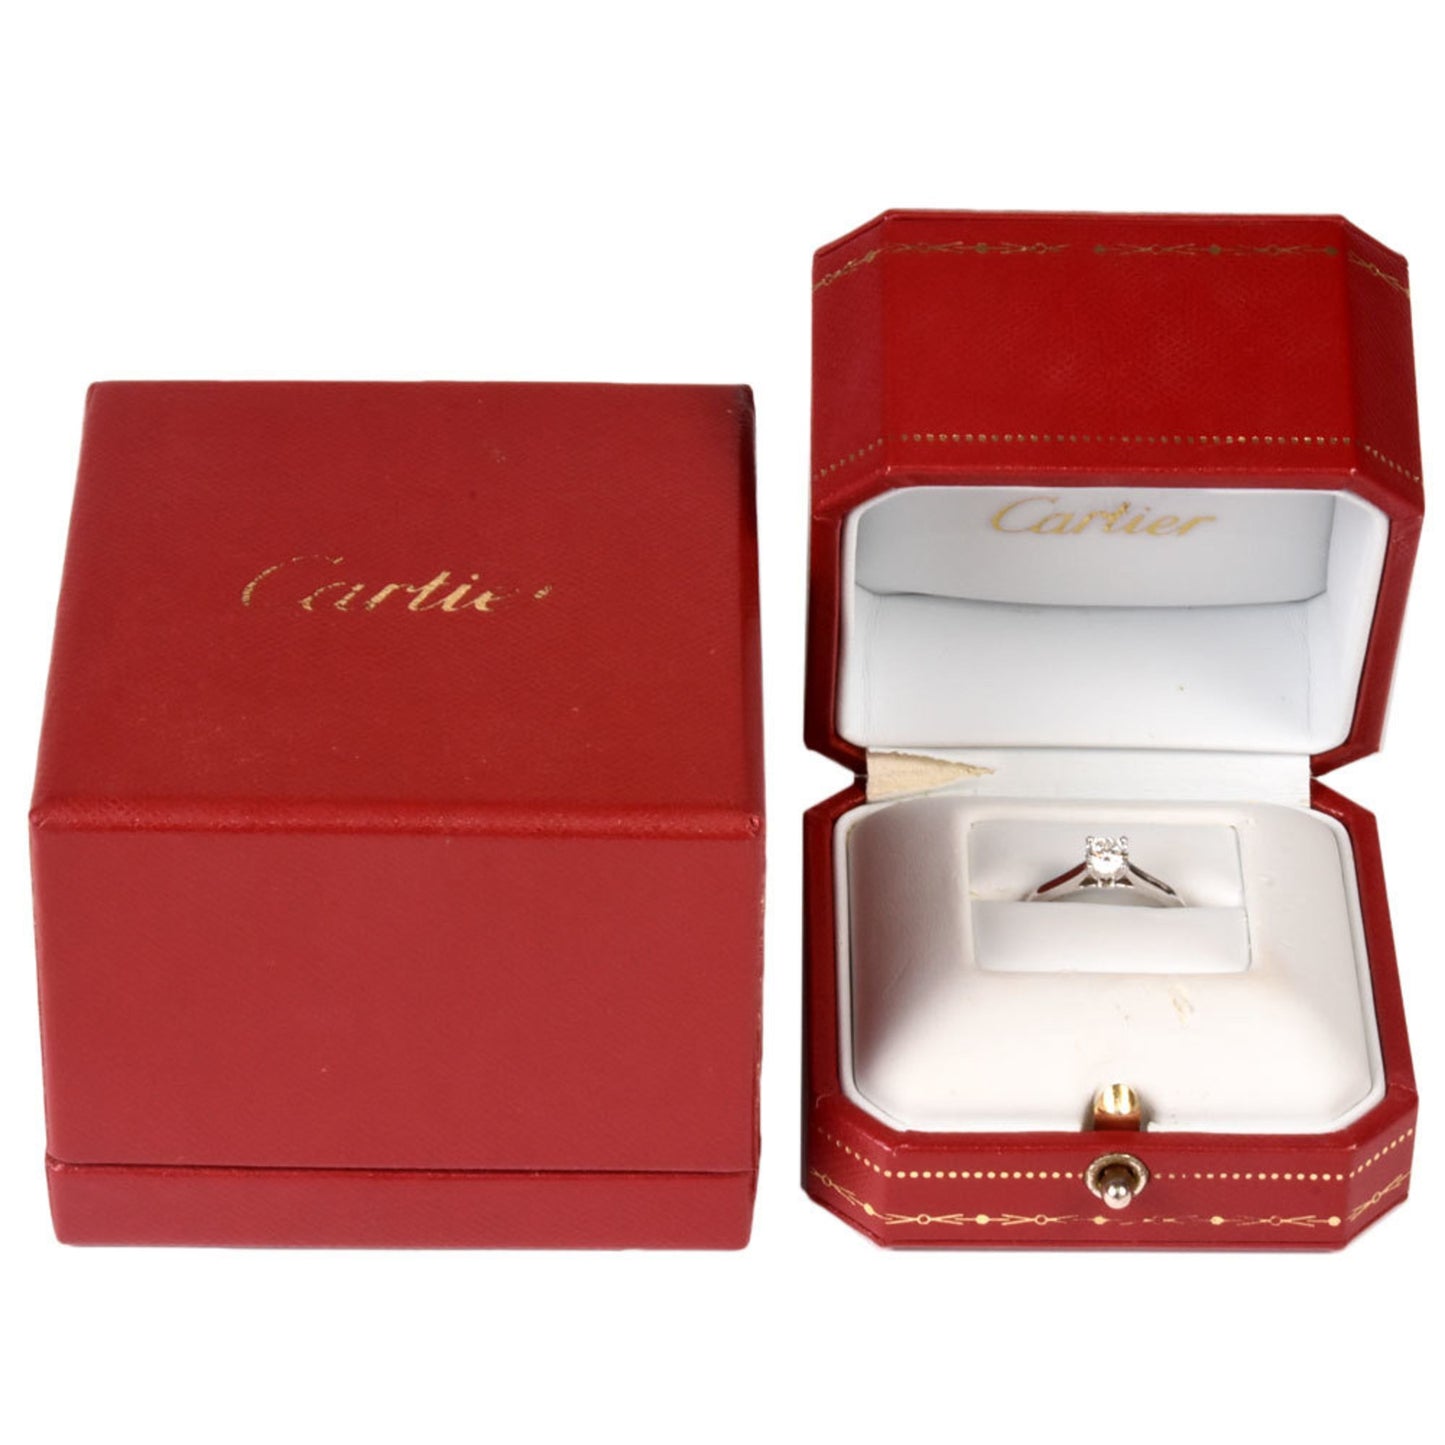 Cartier Women's Platinum Solitaire Ring in Silver